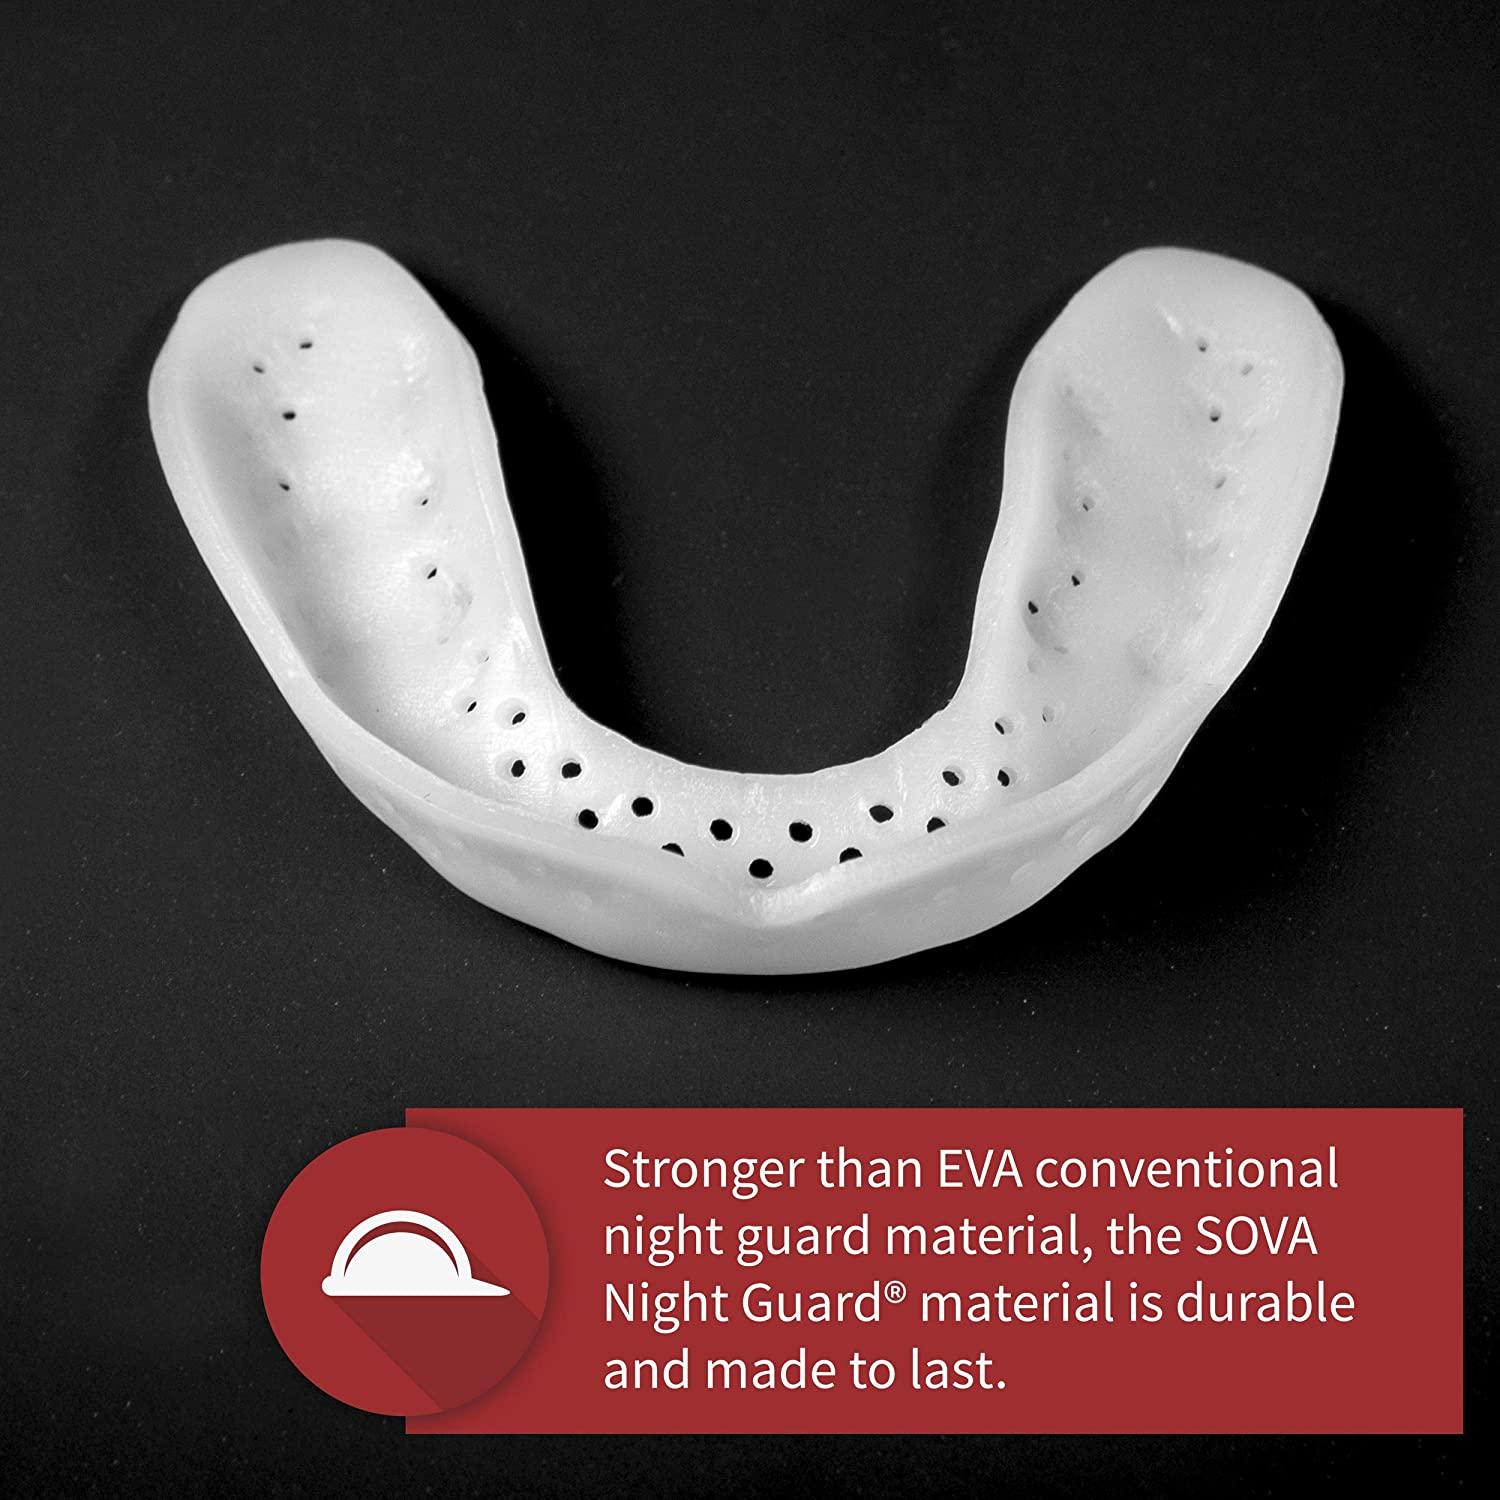 SOVA Aero Night Guard with Case - 1.6mm Thin - Custom-Molded Fit - Protects  Against Nighttime Teeth Grinding & Clenching - Odor & Taste Free 